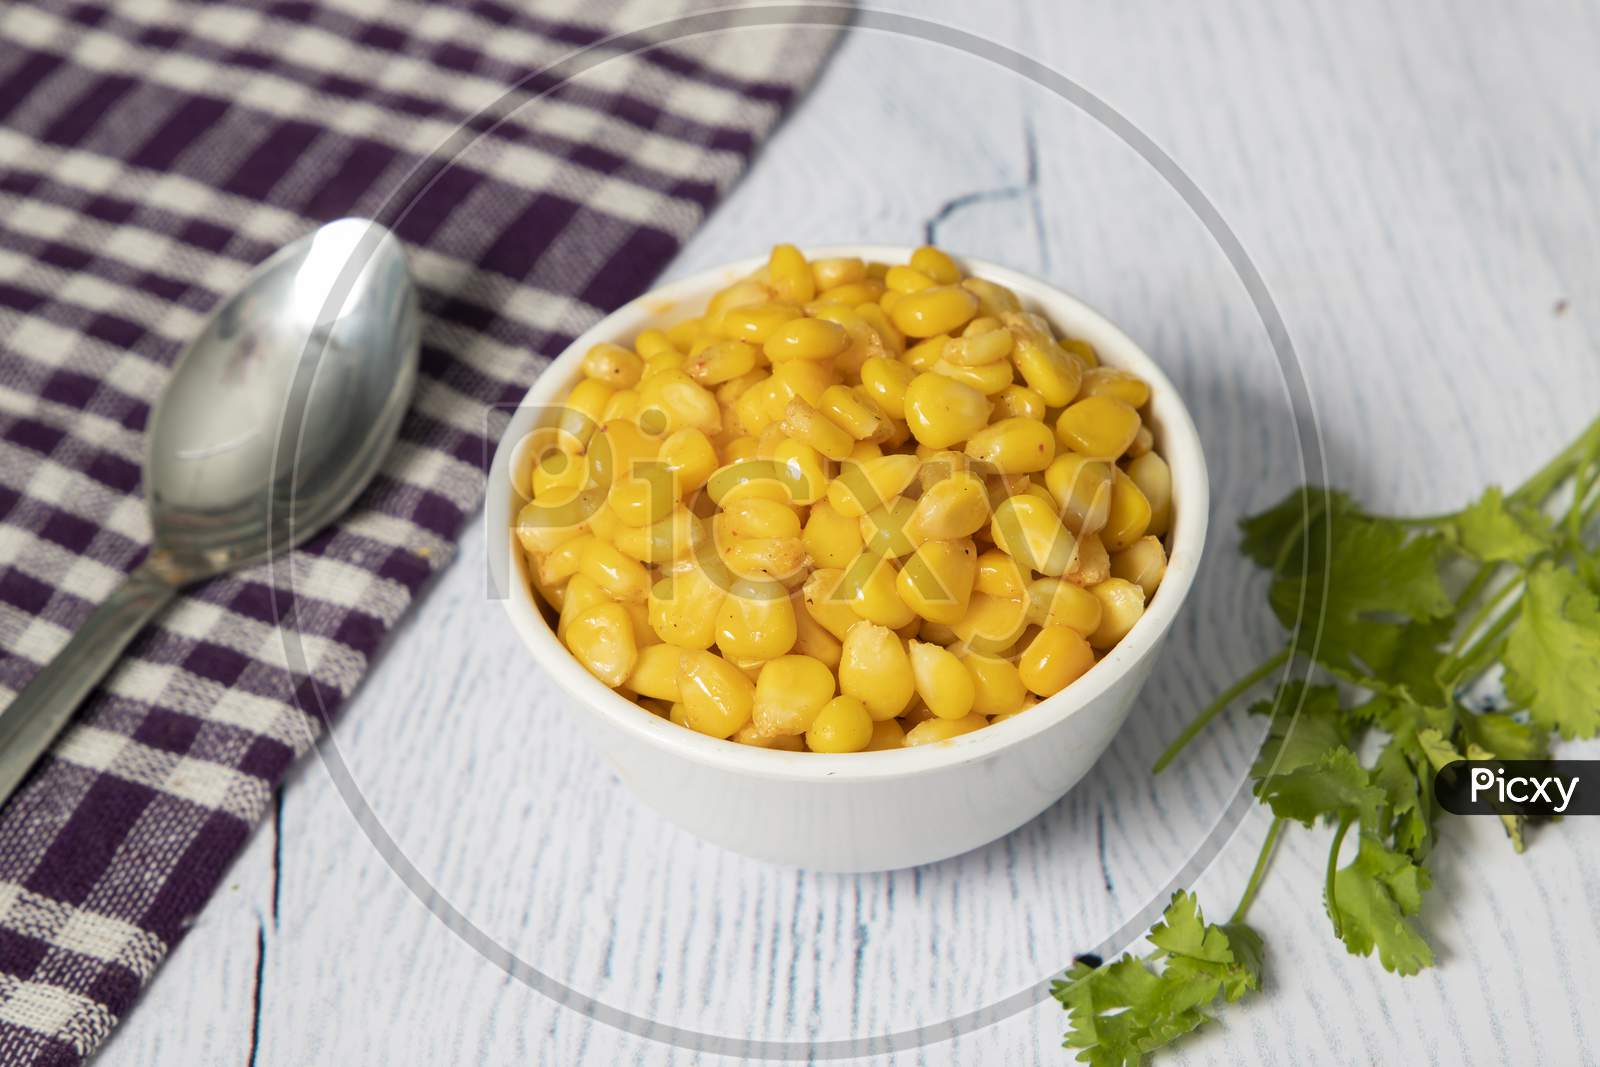 A cup of cooked sweet corn.